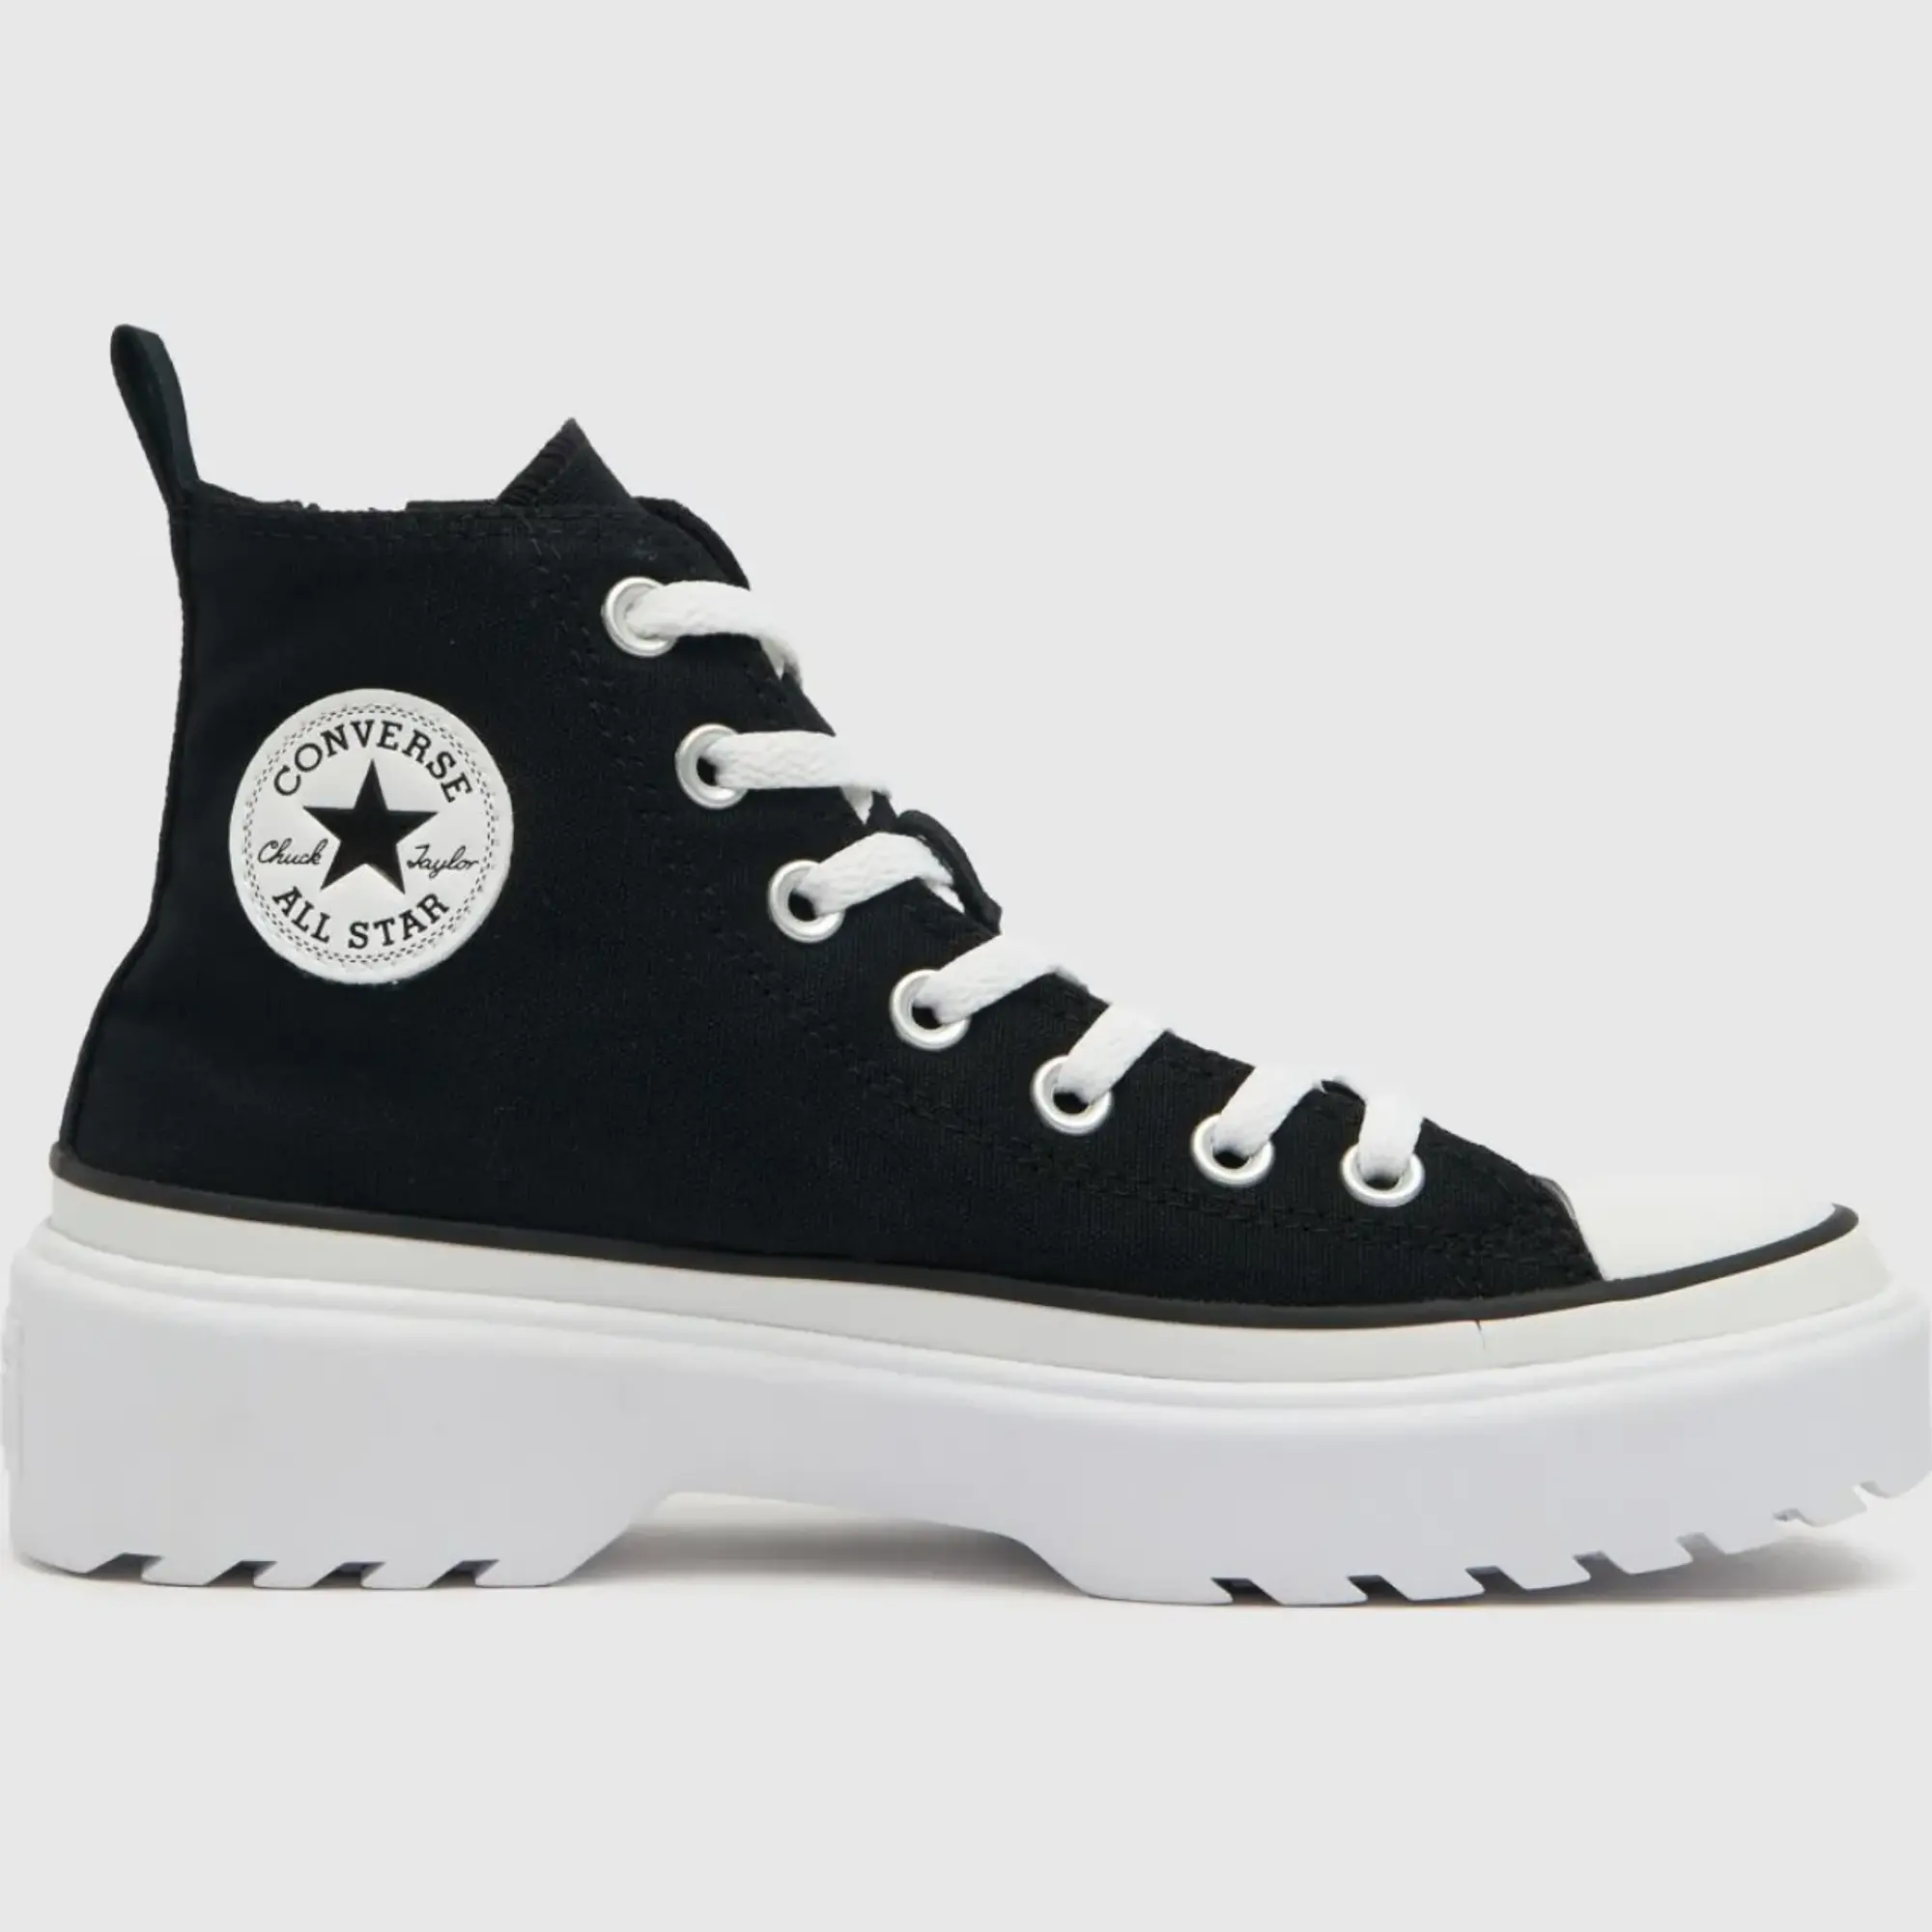 Converse Black & White Lugged Lift Girls Youth Trainers